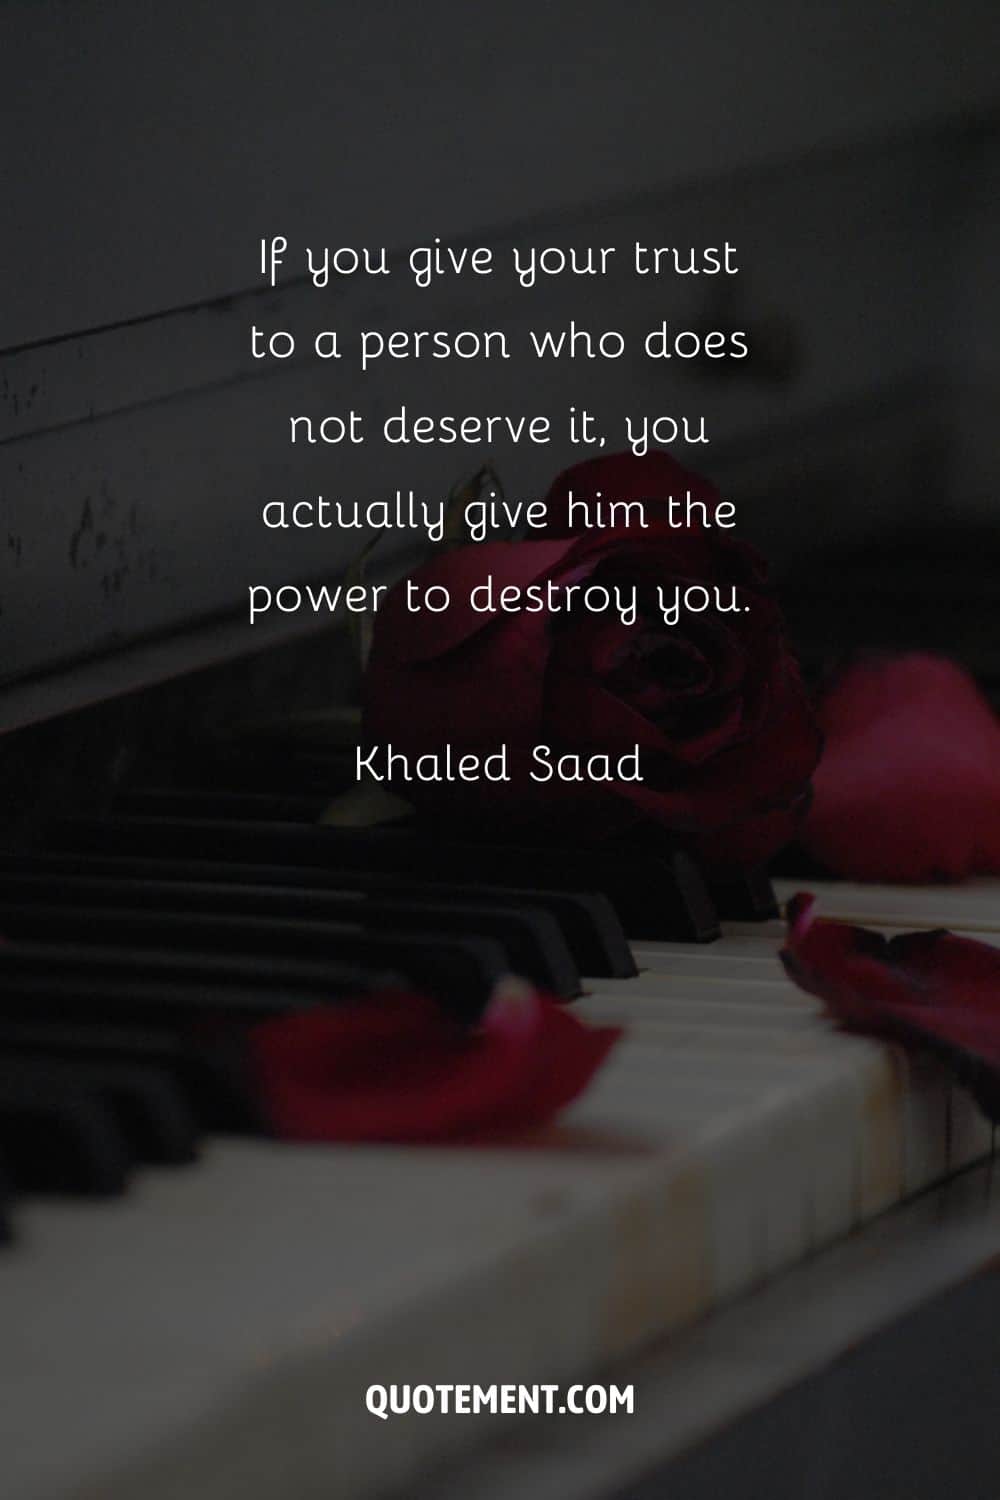 “If you give your trust to a person who does not deserve it, you actually give him the power to destroy you.” — Khaled Saad